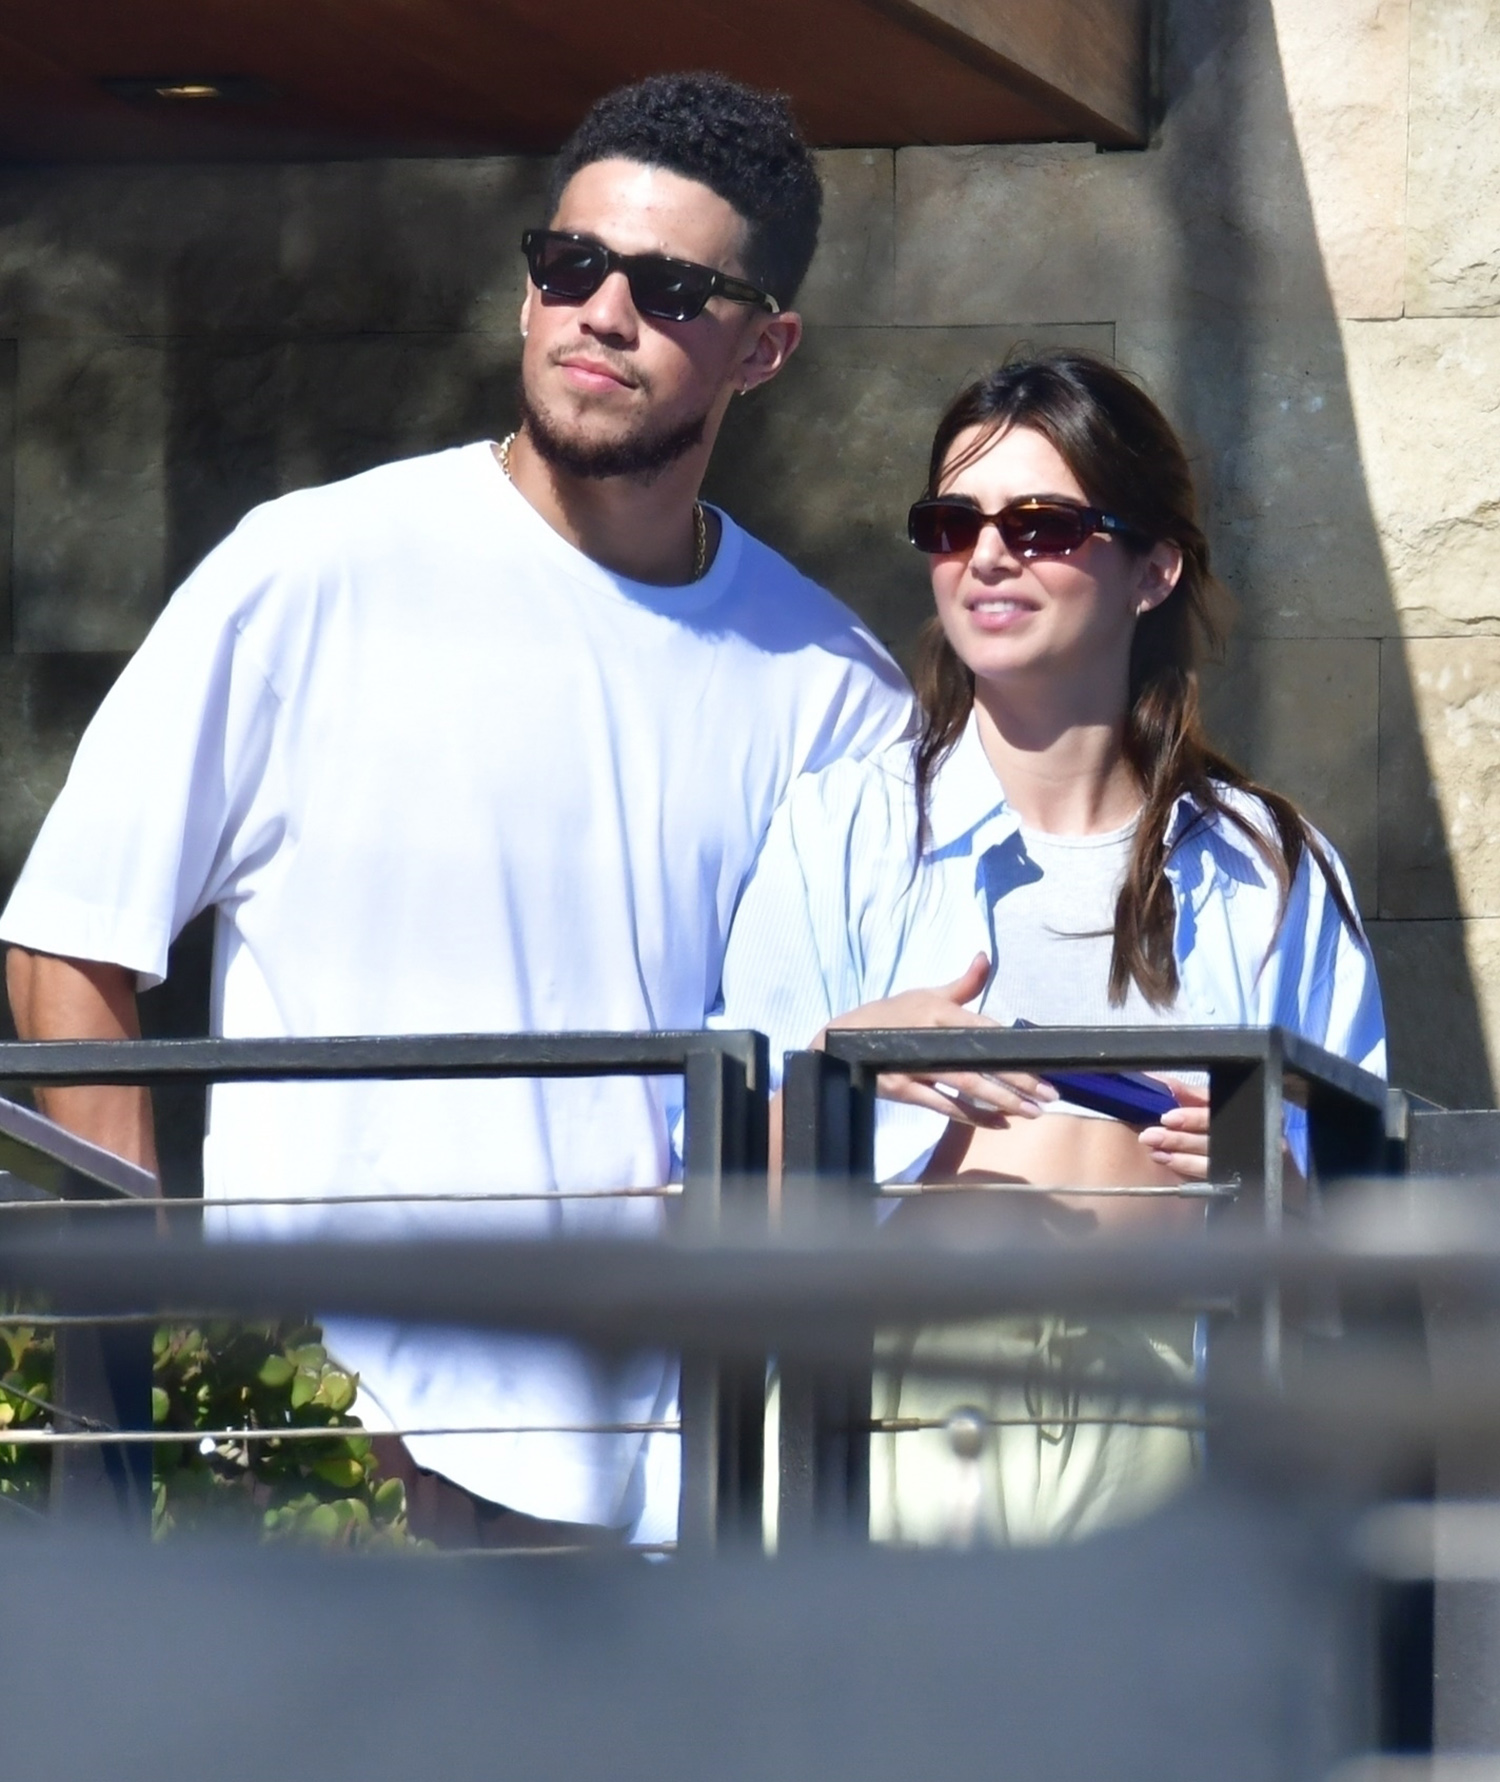 *PREMIUM-EXCLUSIVE* Second Thoughts? Kendall and Devin Booker spotted looking VERY FLIRTY just days after rumored split!